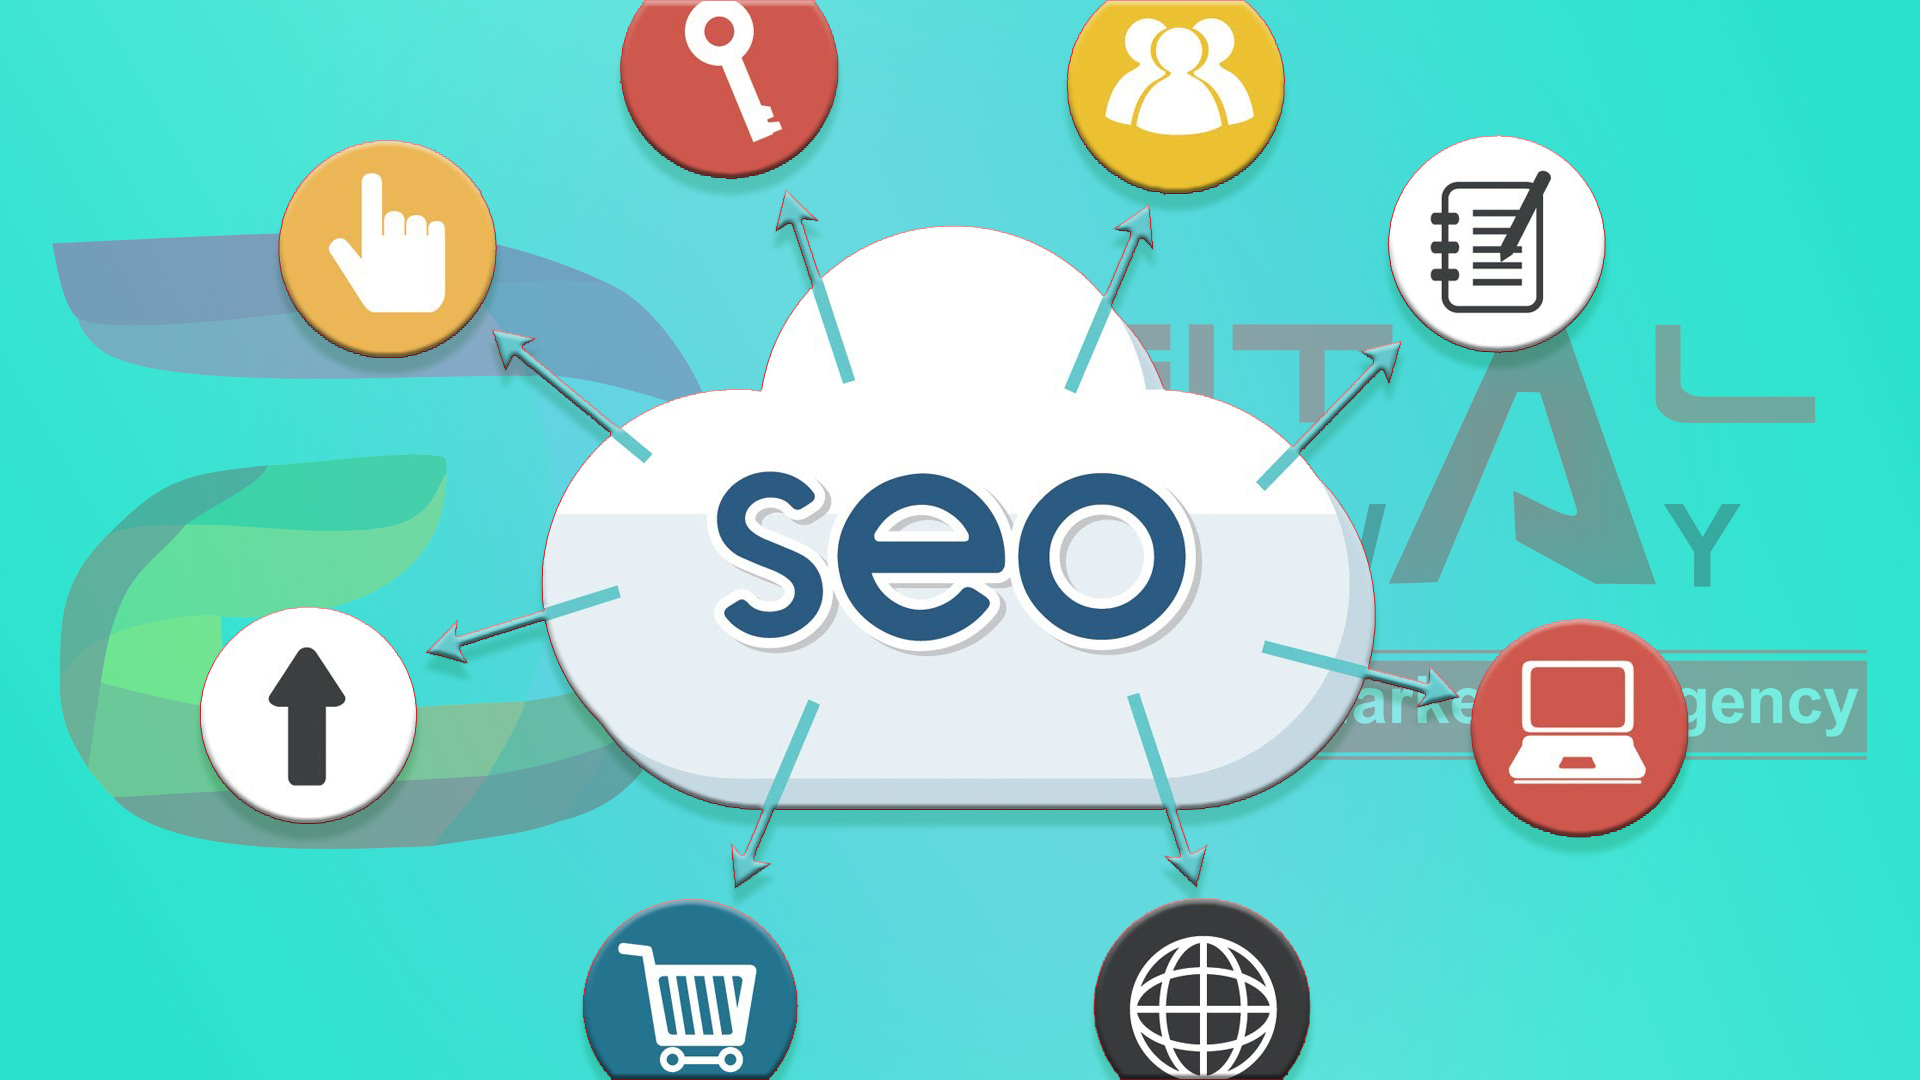 seo software buy, seo content writer software buy, best seo software buy, software buy for seo, software buy, seo software, seo software agencies, best software buy, seo software buy online, software buy India, seo software buy in India, seo internet software buy online, seo software buy company, seo tools buy, seo software companies